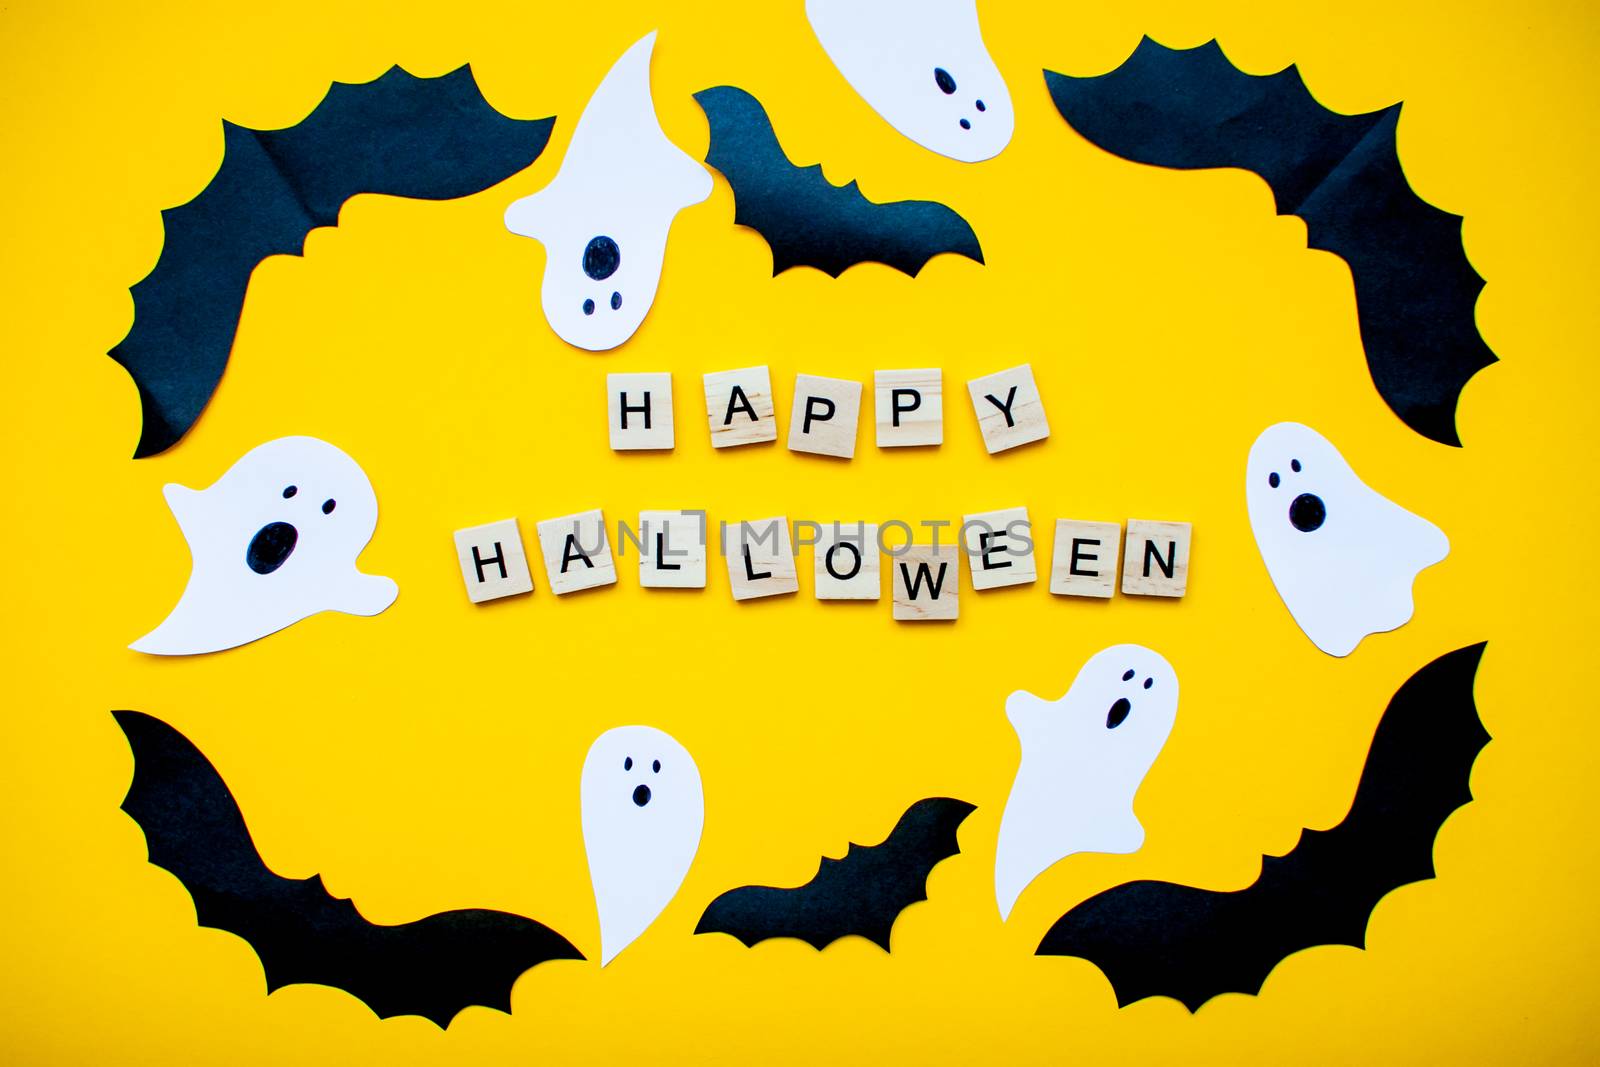 inscription from wooden blocks Happy Halloween and frame made of paper homemade bats and paper ghosts on a bright yellow background